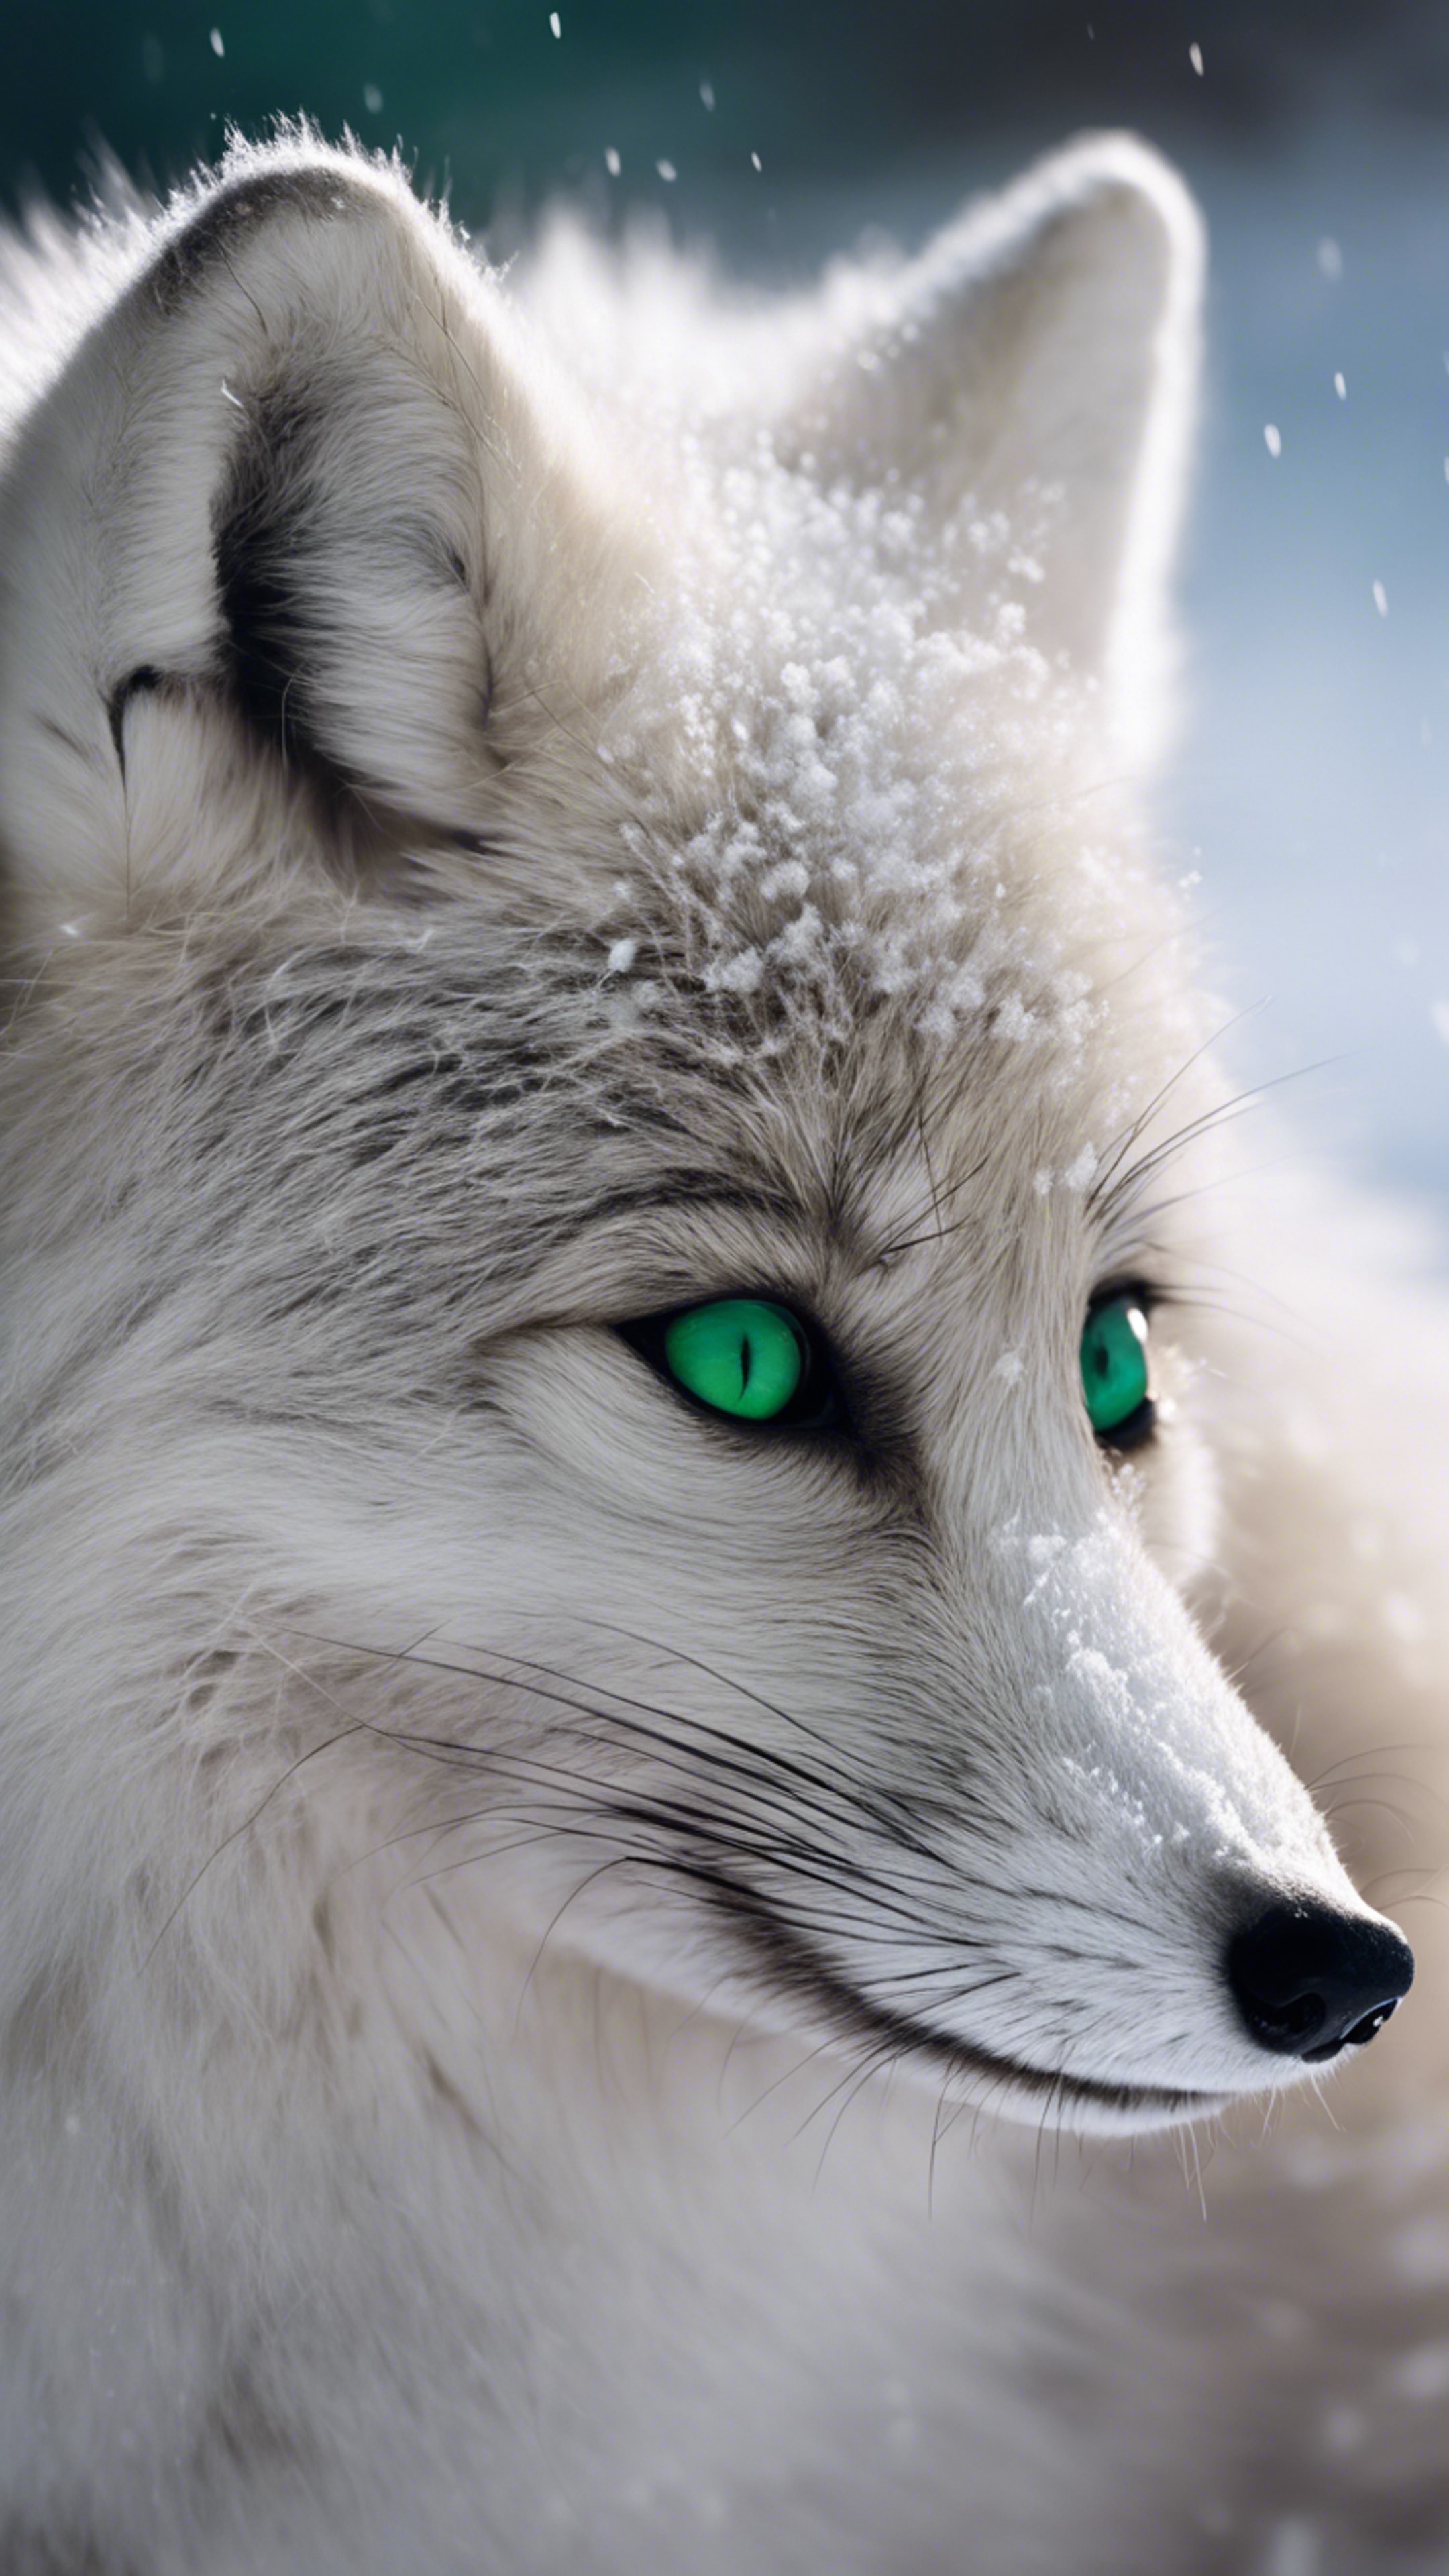 A fluffy, smoky gray arctic fox curled up in a snowy setting, its vivid green eyes staring directly at the viewer. Tapeta[a0ededdcc5bf4726bdb5]